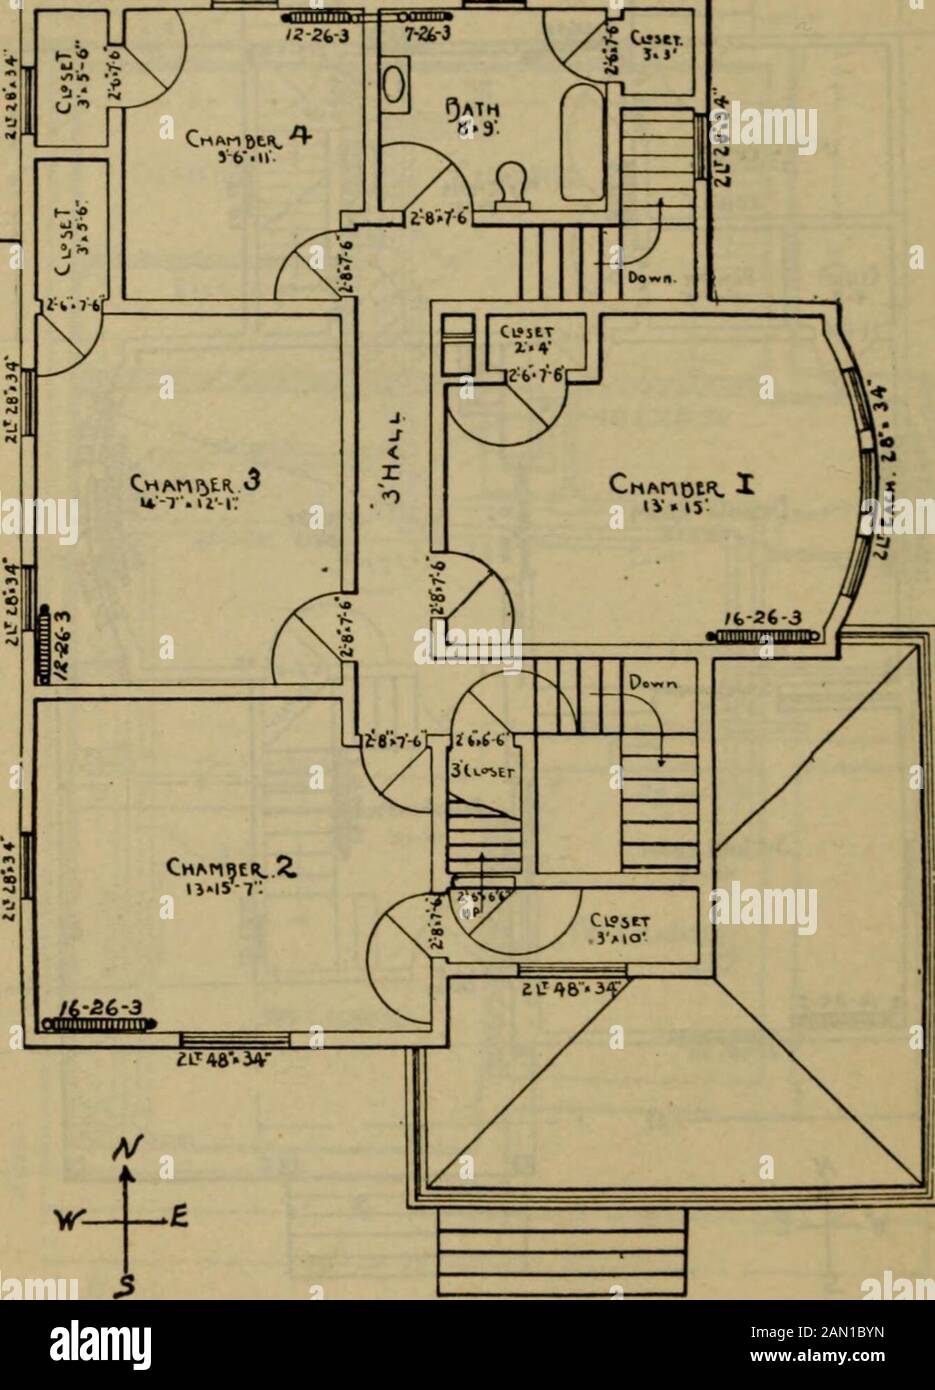 Handbook for heating and ventilating engineers . FIRST FLOOR PLAN.Ceiling 10. Fig. 66. 130 HEATING AND VENTILATION i..v-iA /. SECOND FLOOR PLAN.Ceiling 9. Fig. 67. HOT WATER AND STEAM HEATING 131 1226^ 7-26-3 ExpTonK. Stock Photo